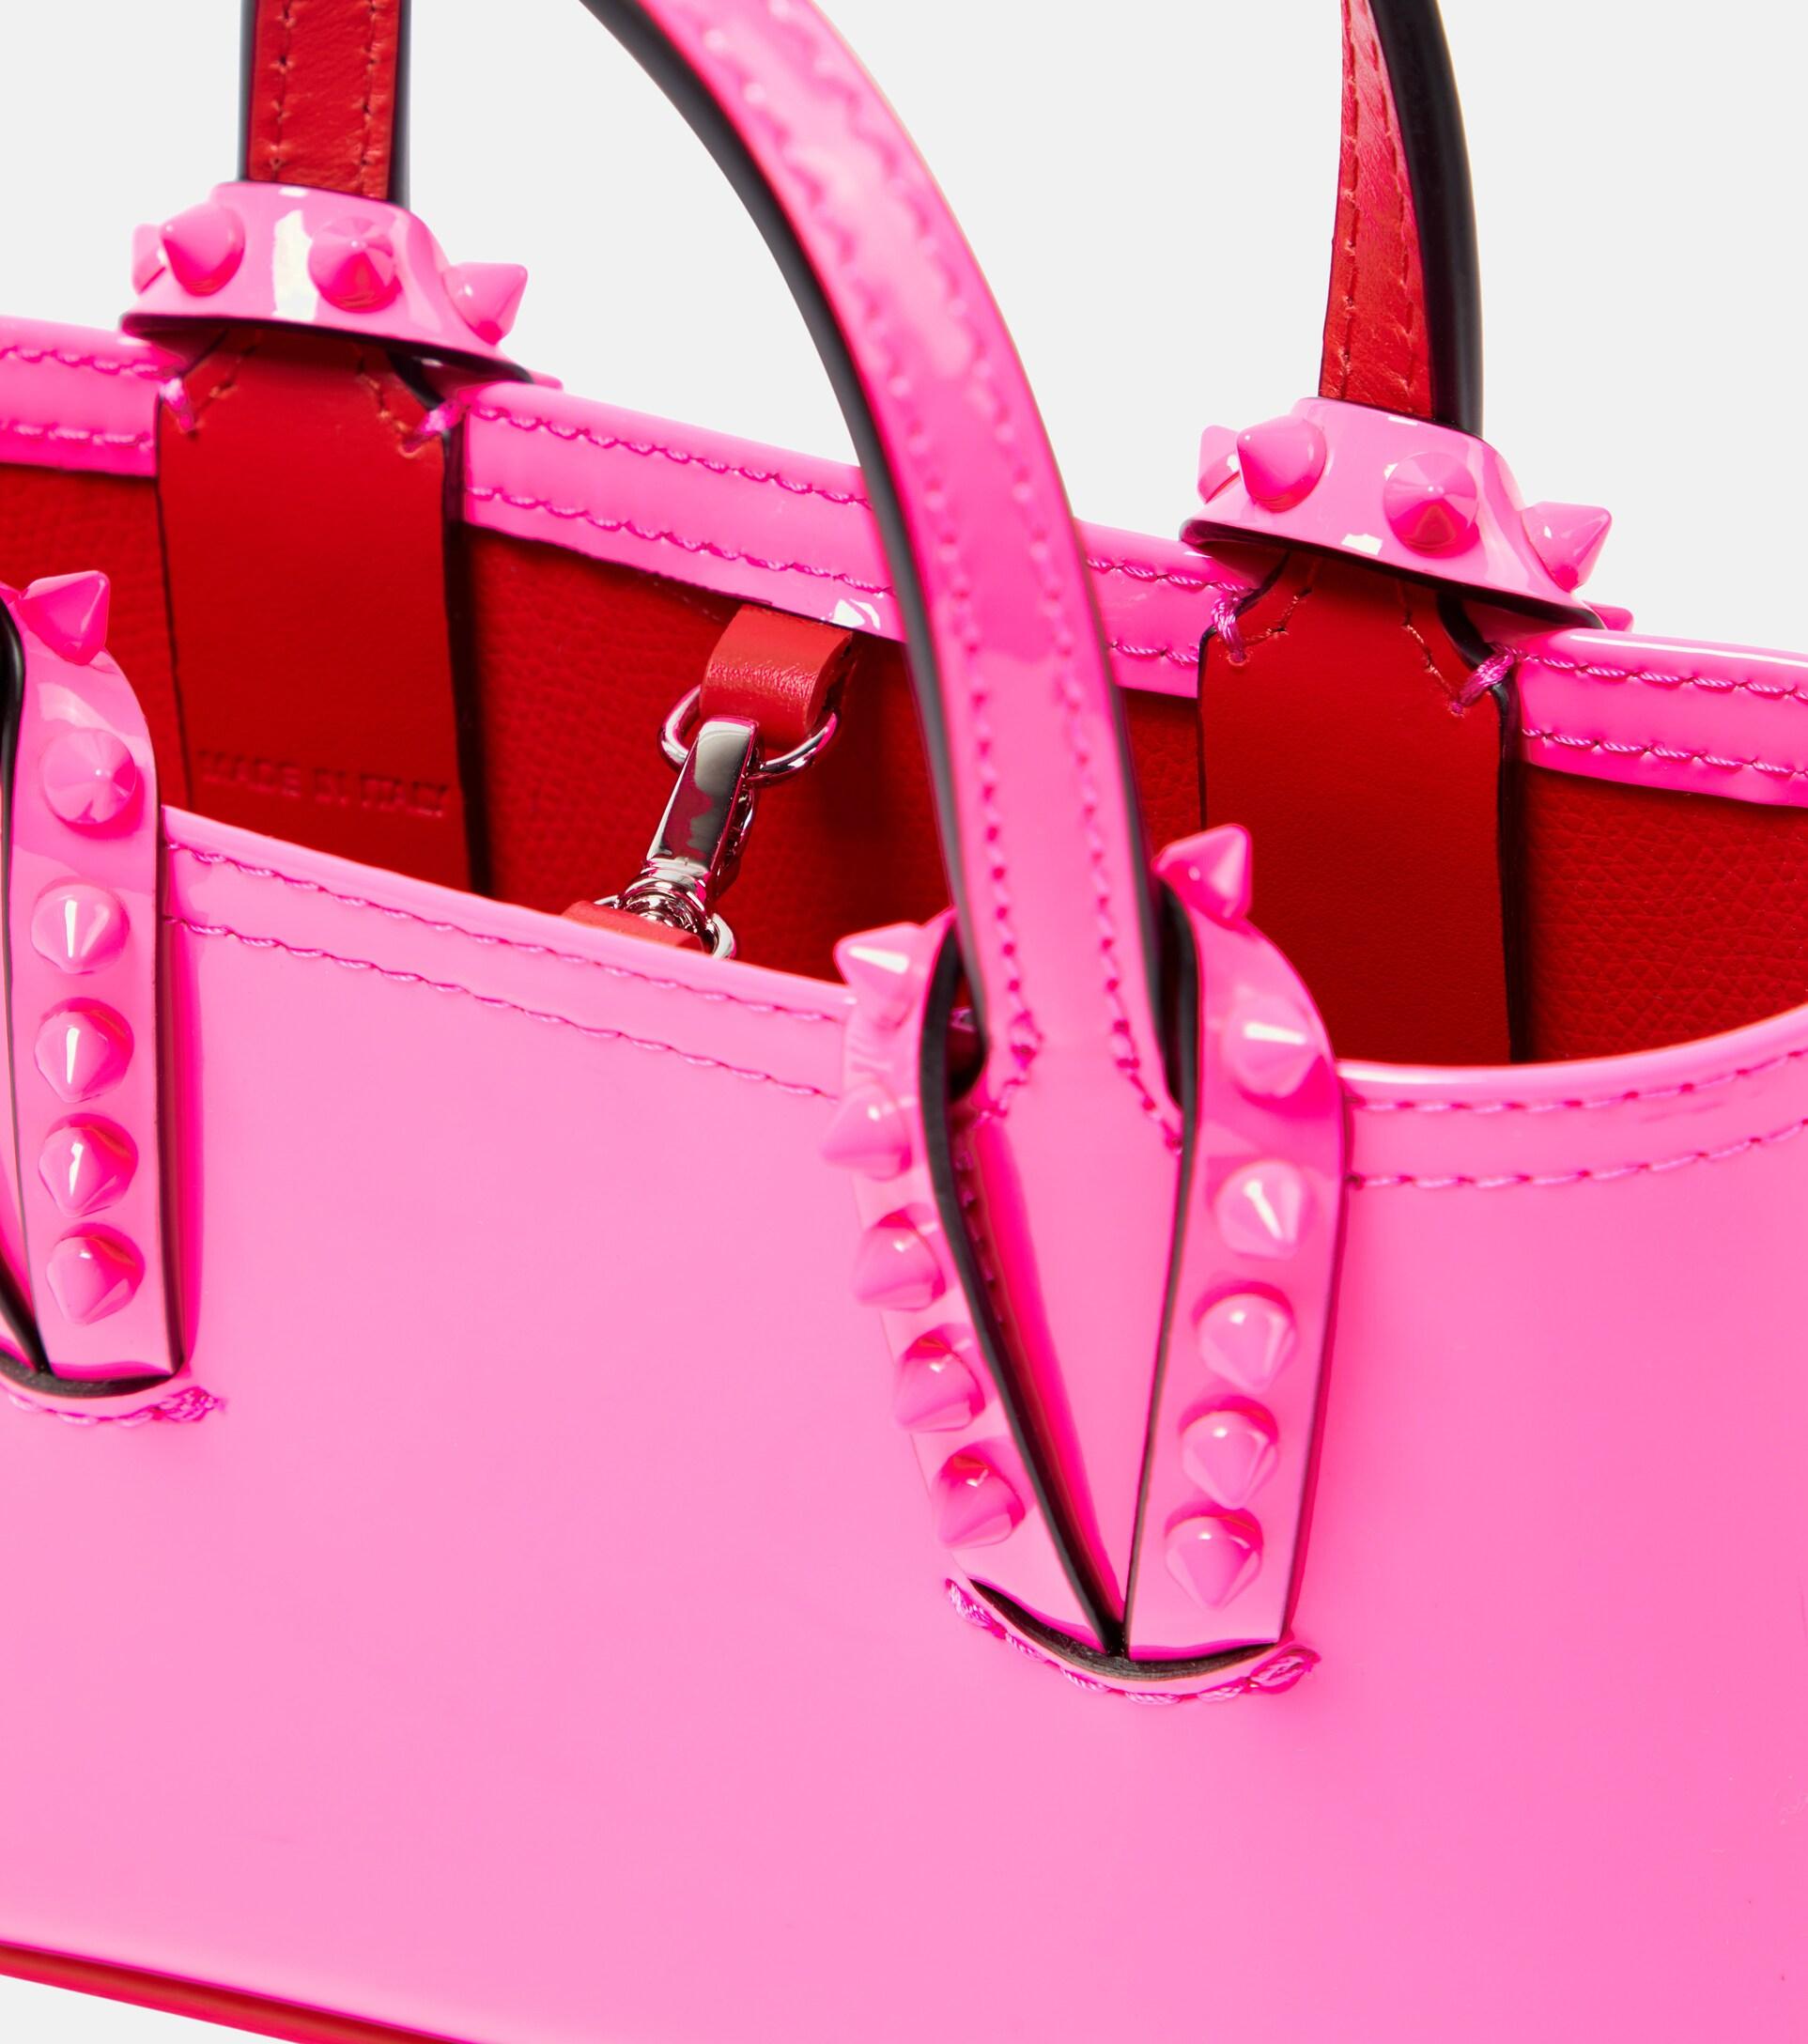 Christian Louboutin Cabata Small Tote In Rose-pink Leather